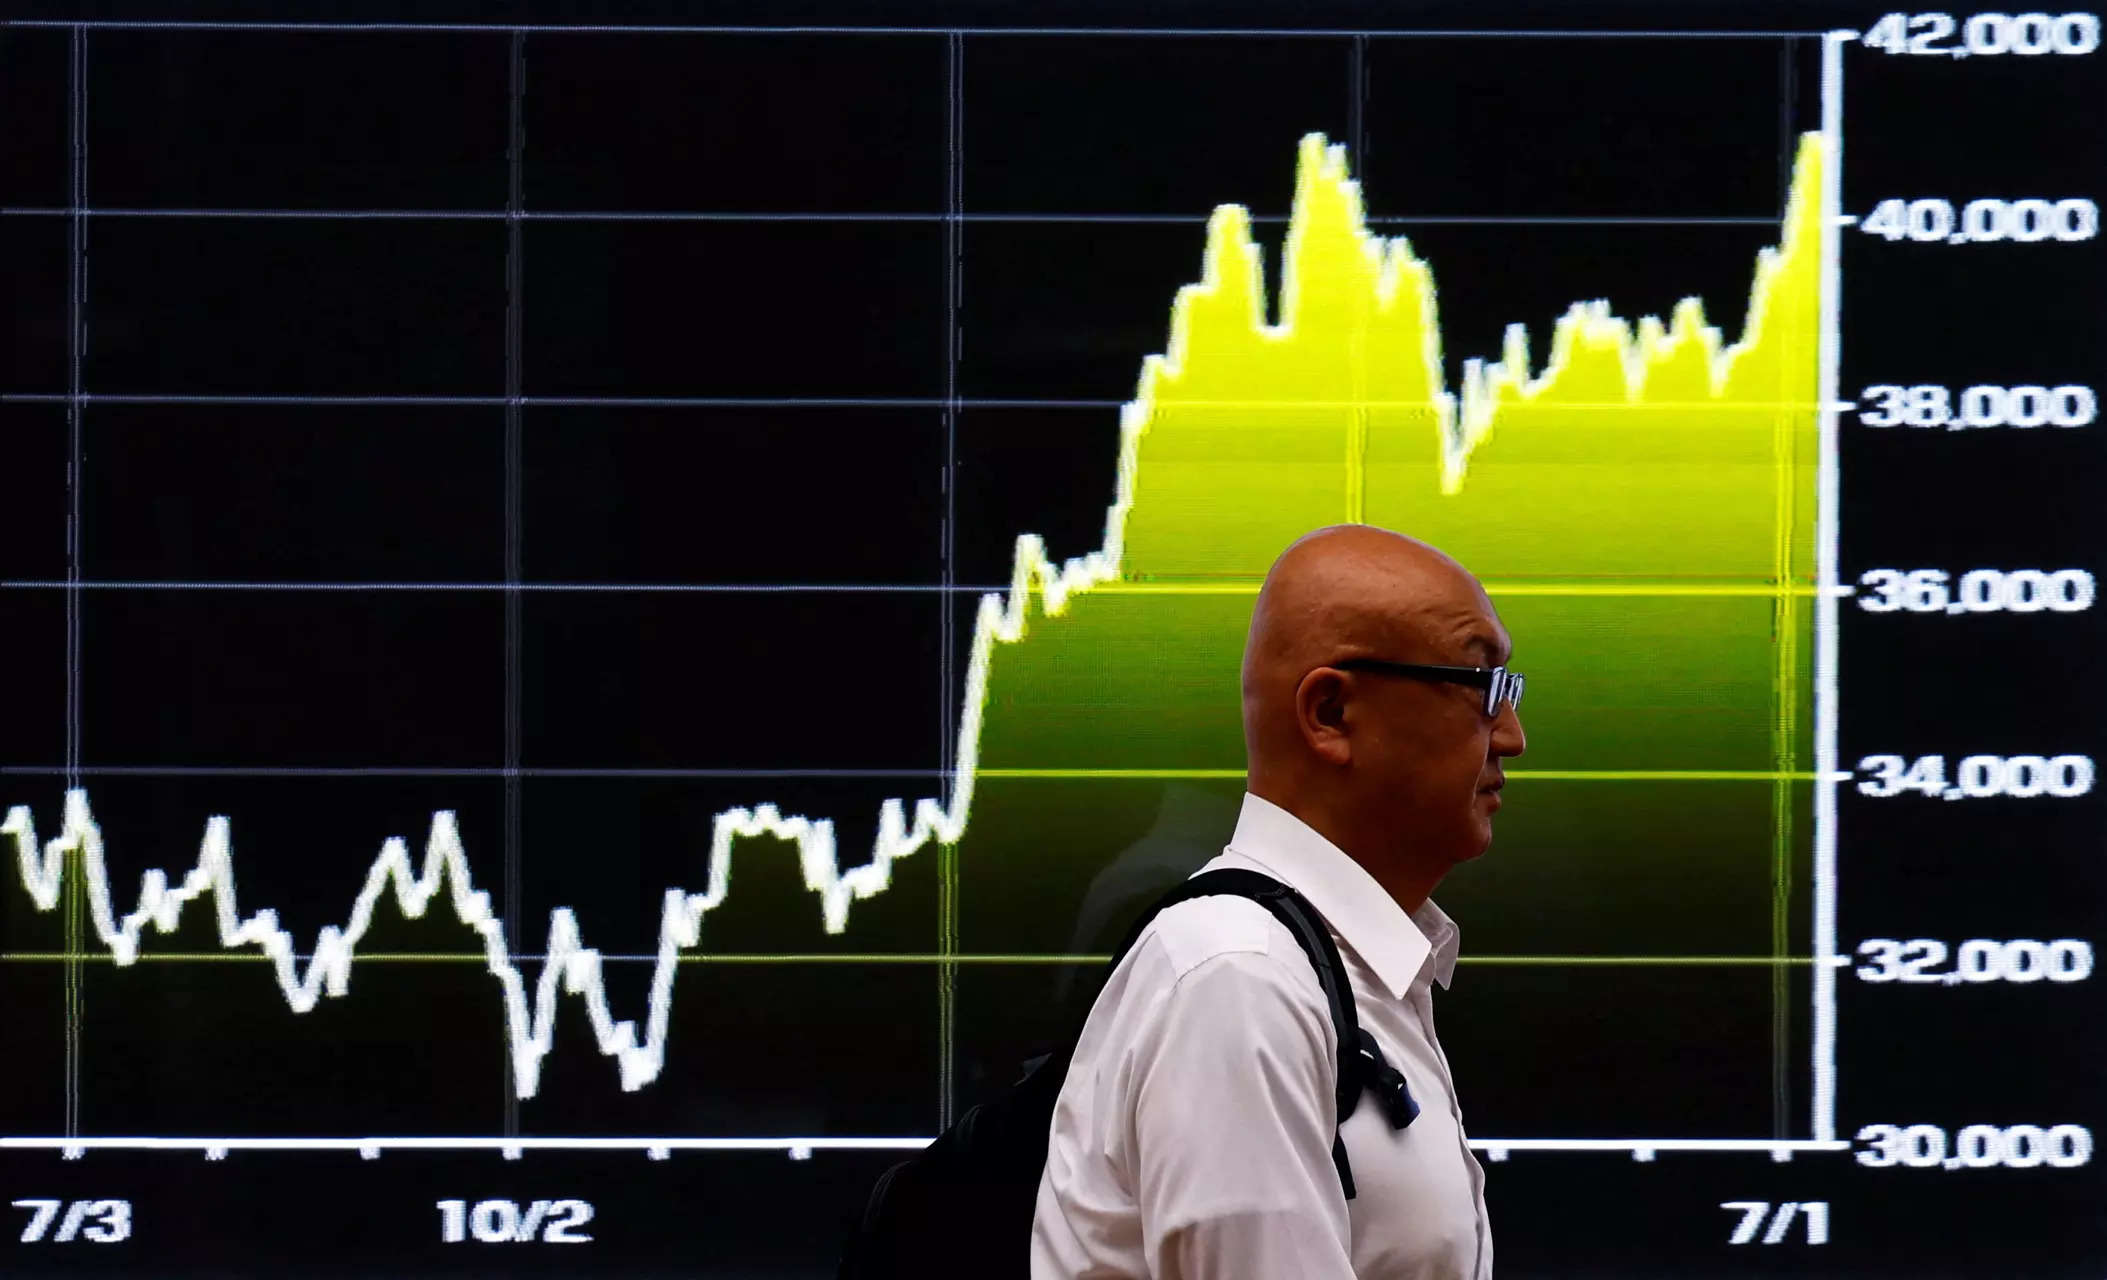 Japan's Nikkei crosses 42,000 points as Wall Street rally spurs sentiment 